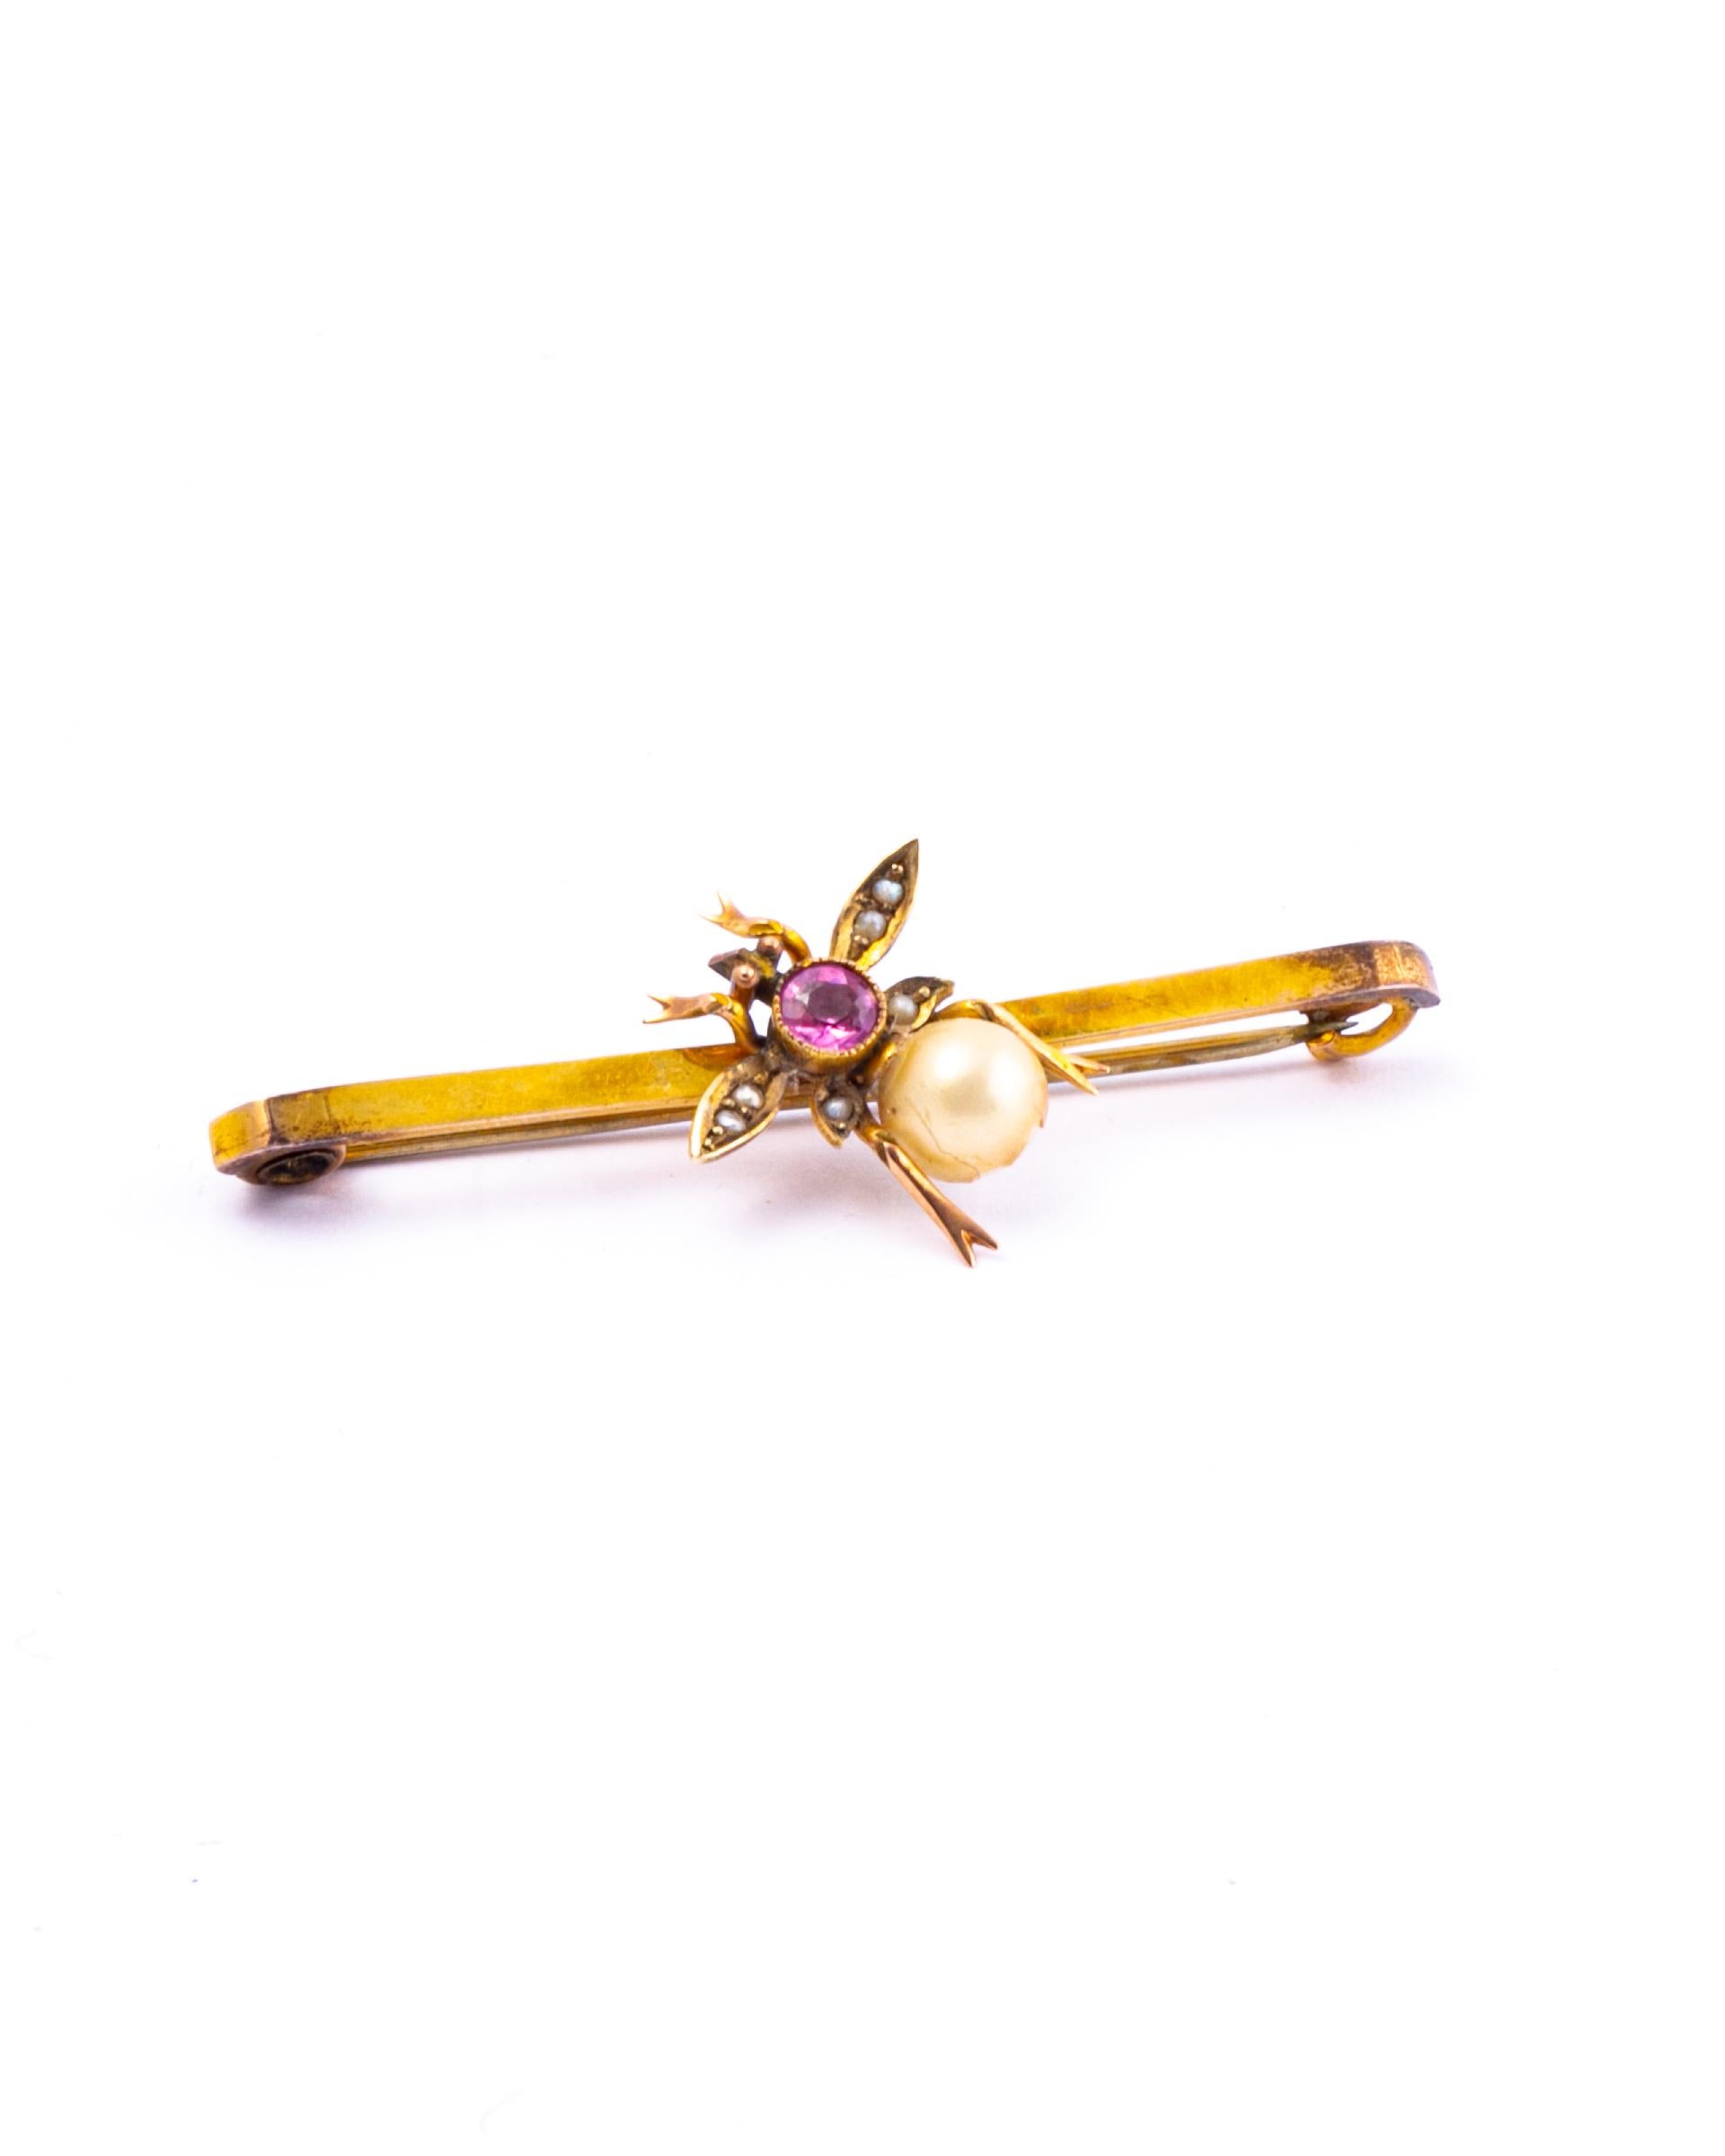 This sweet bug perched on this fine brooch and is encrusted with seed pearls. The gorgeous bug has a pink gem stone set within it. 

Dimensions Of Bug: 15x17mm
Length Of Brooch: 45mm

Weight: 2.3g
